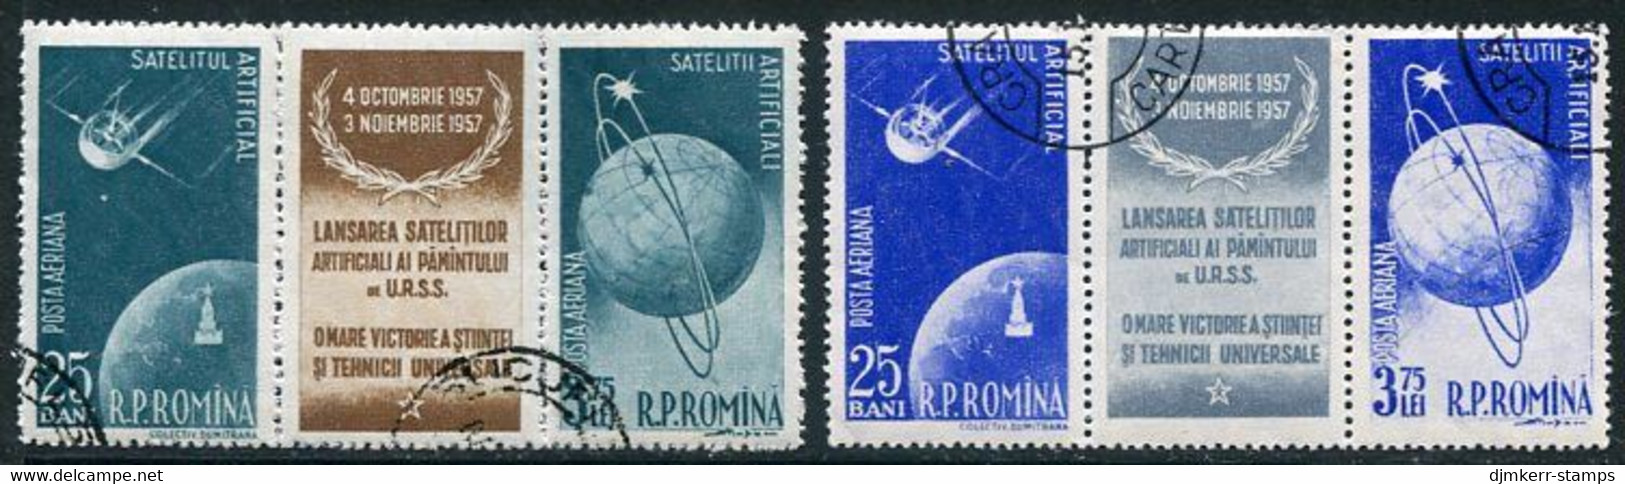 ROMANIA 1957 Launch Of First Earth Satellites Strips Used.  Michel 1677-80 - Gebruikt